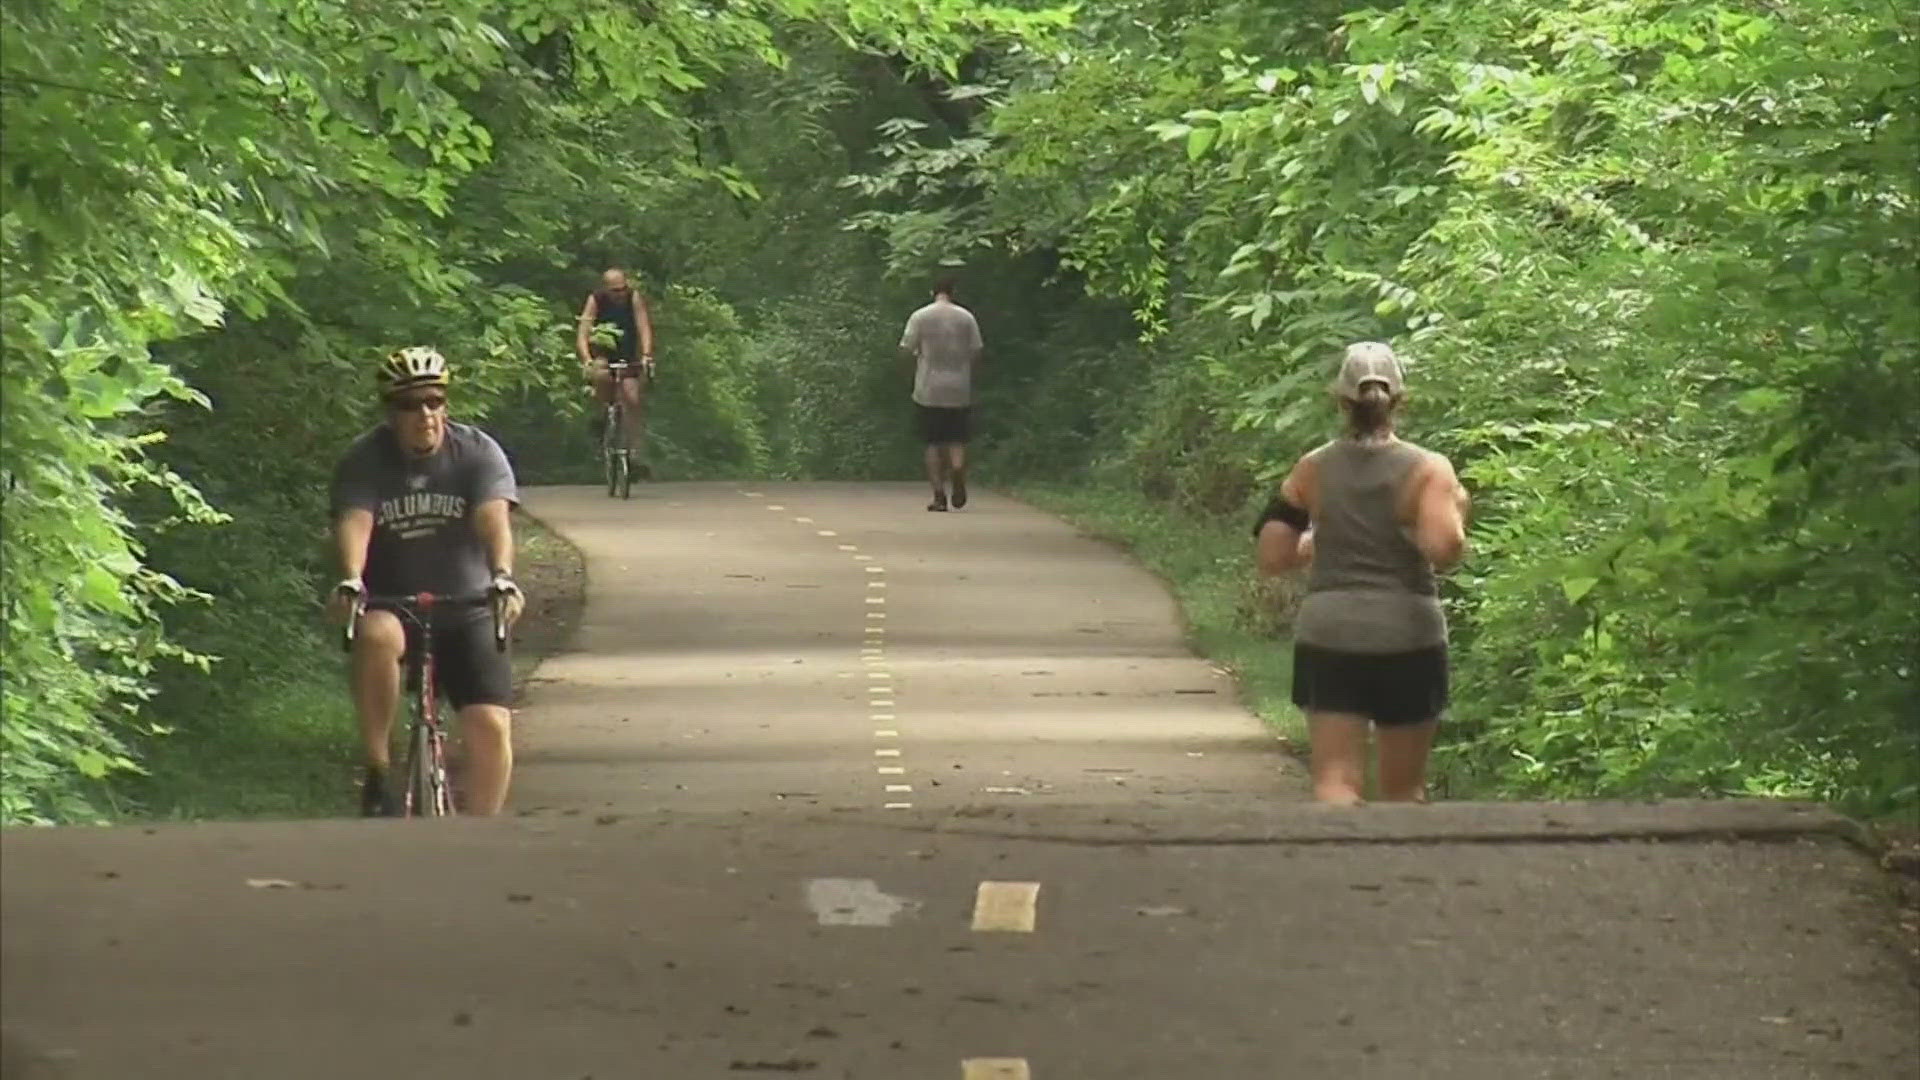 A doctor from OhioHealth told 10TV the best time to work out on a hot day is around 6 or 7 in the morning.